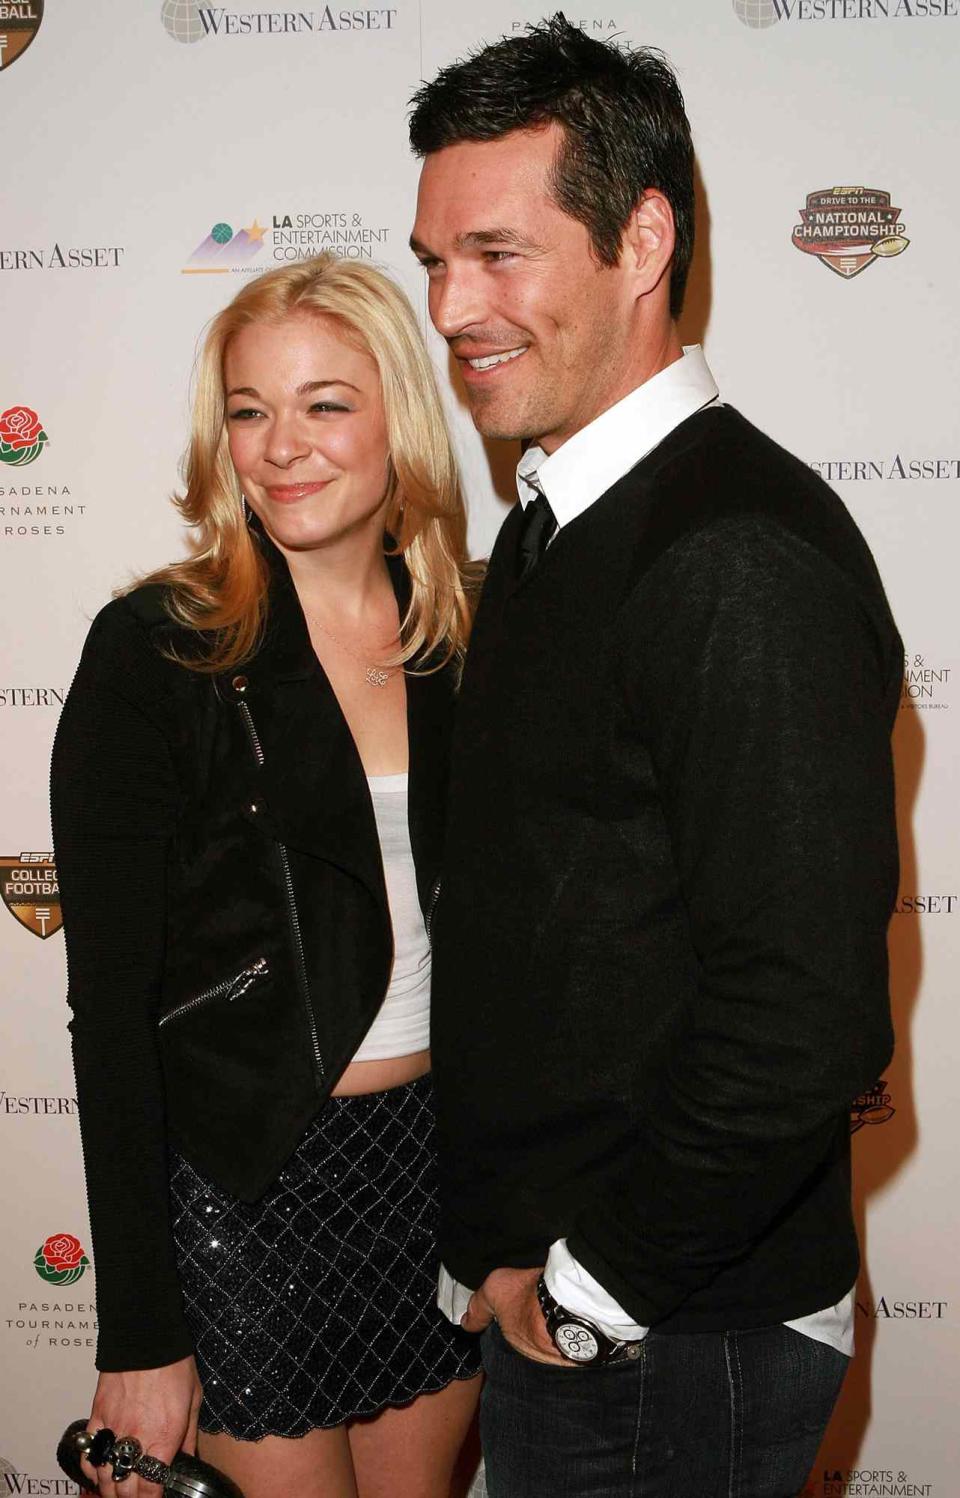 LeAnn Rimes and actor Eddie Cibrian arrive at the 2010 Official BCS National Championship Party at the Pasadena Convention Center on January 6, 2010 in Pasadena, California